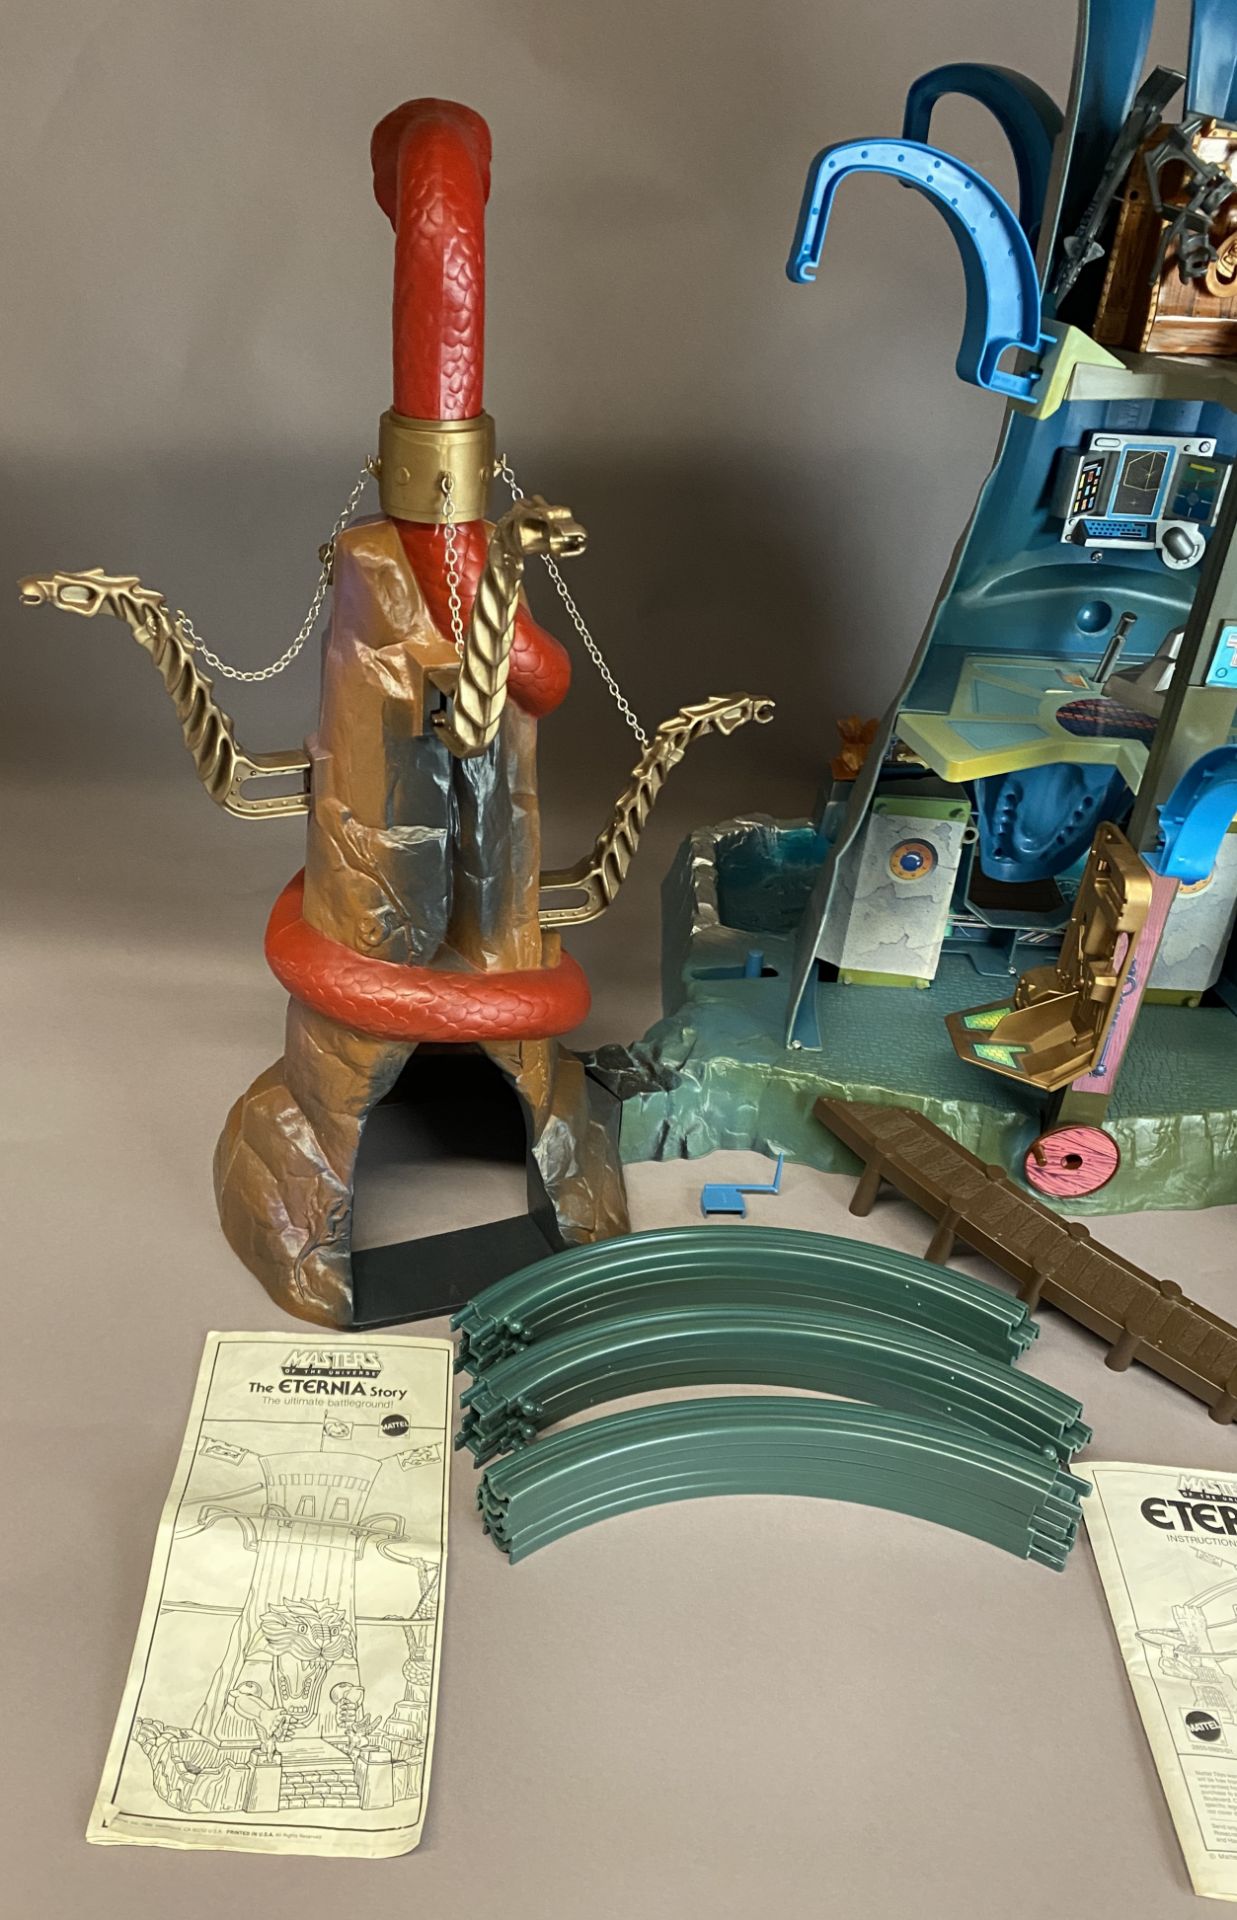 ETERNIA - Vintage Masters of the Universe Playset and Original Box (MOTU) - Appears to be complete - Image 89 of 125